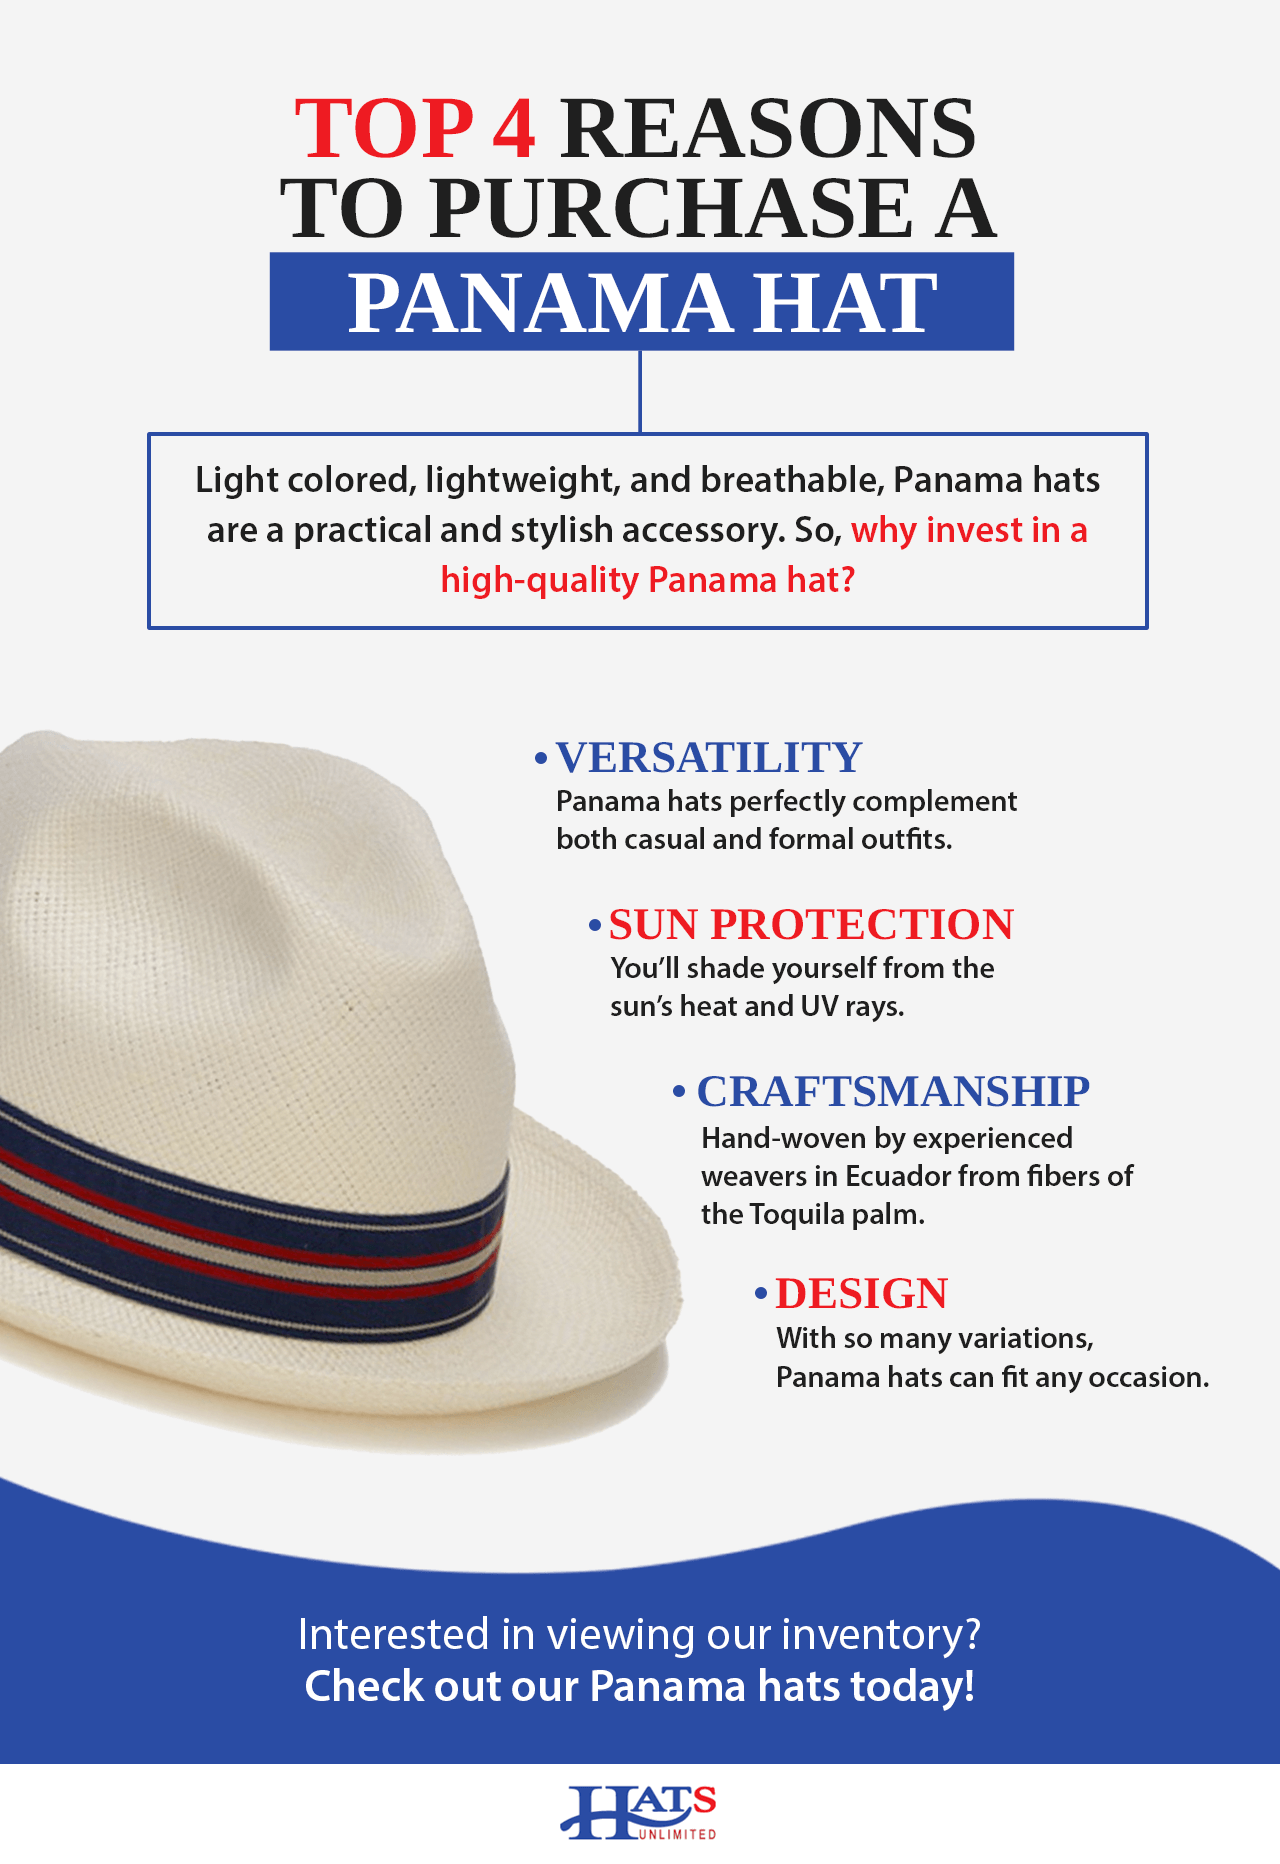 top 4 reasons to purchase a Panama hat